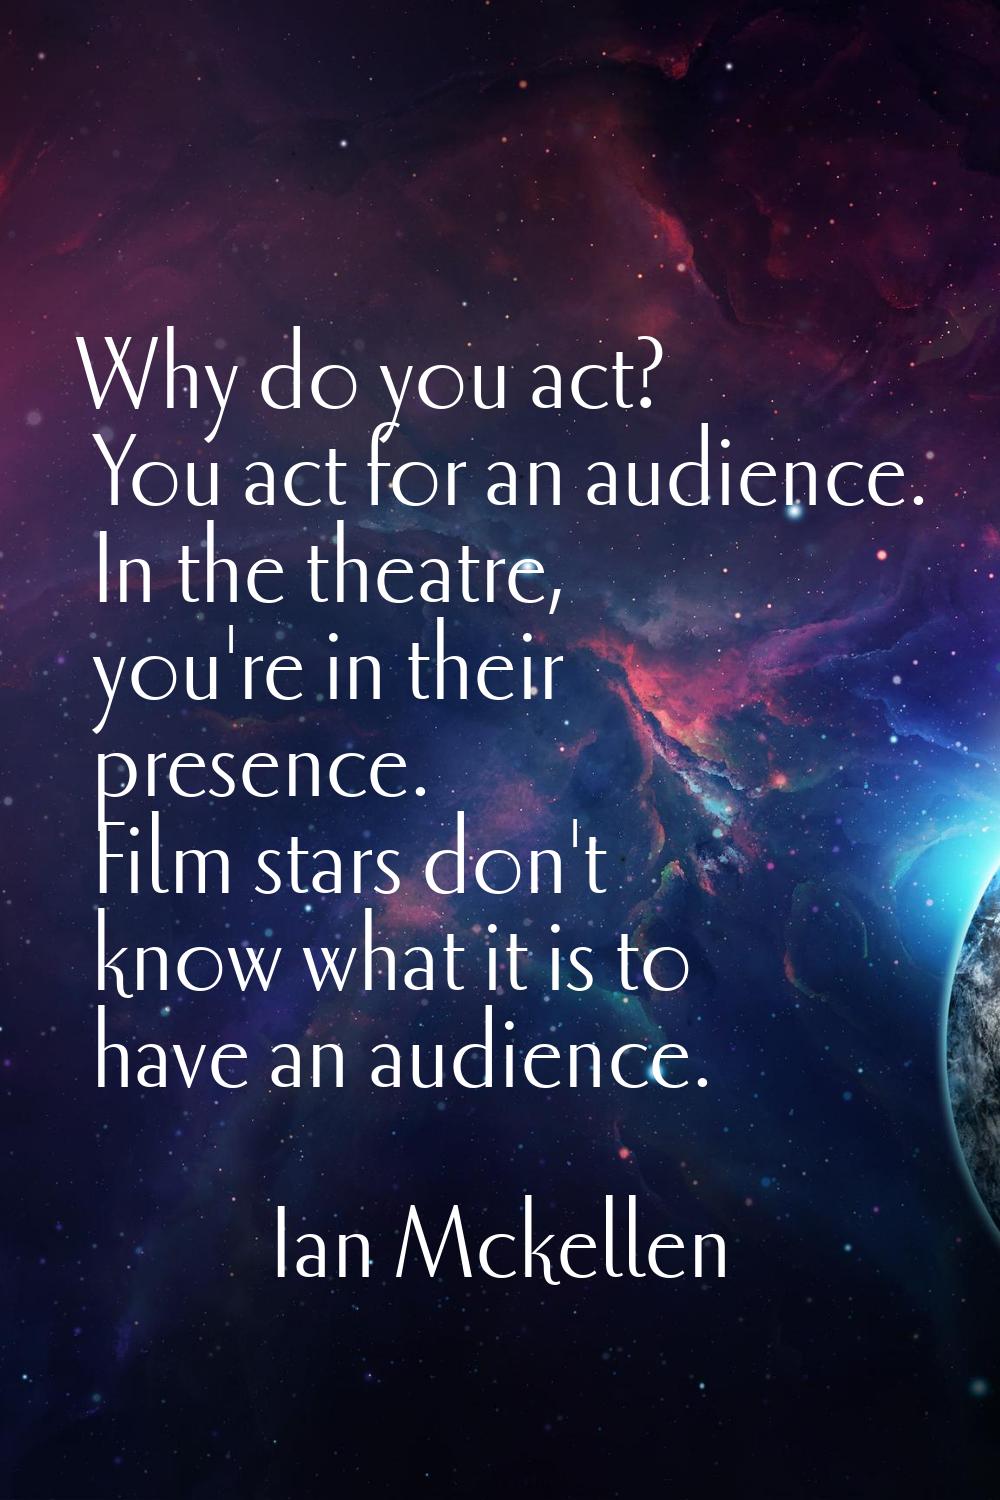 Why do you act? You act for an audience. In the theatre, you're in their presence. Film stars don't